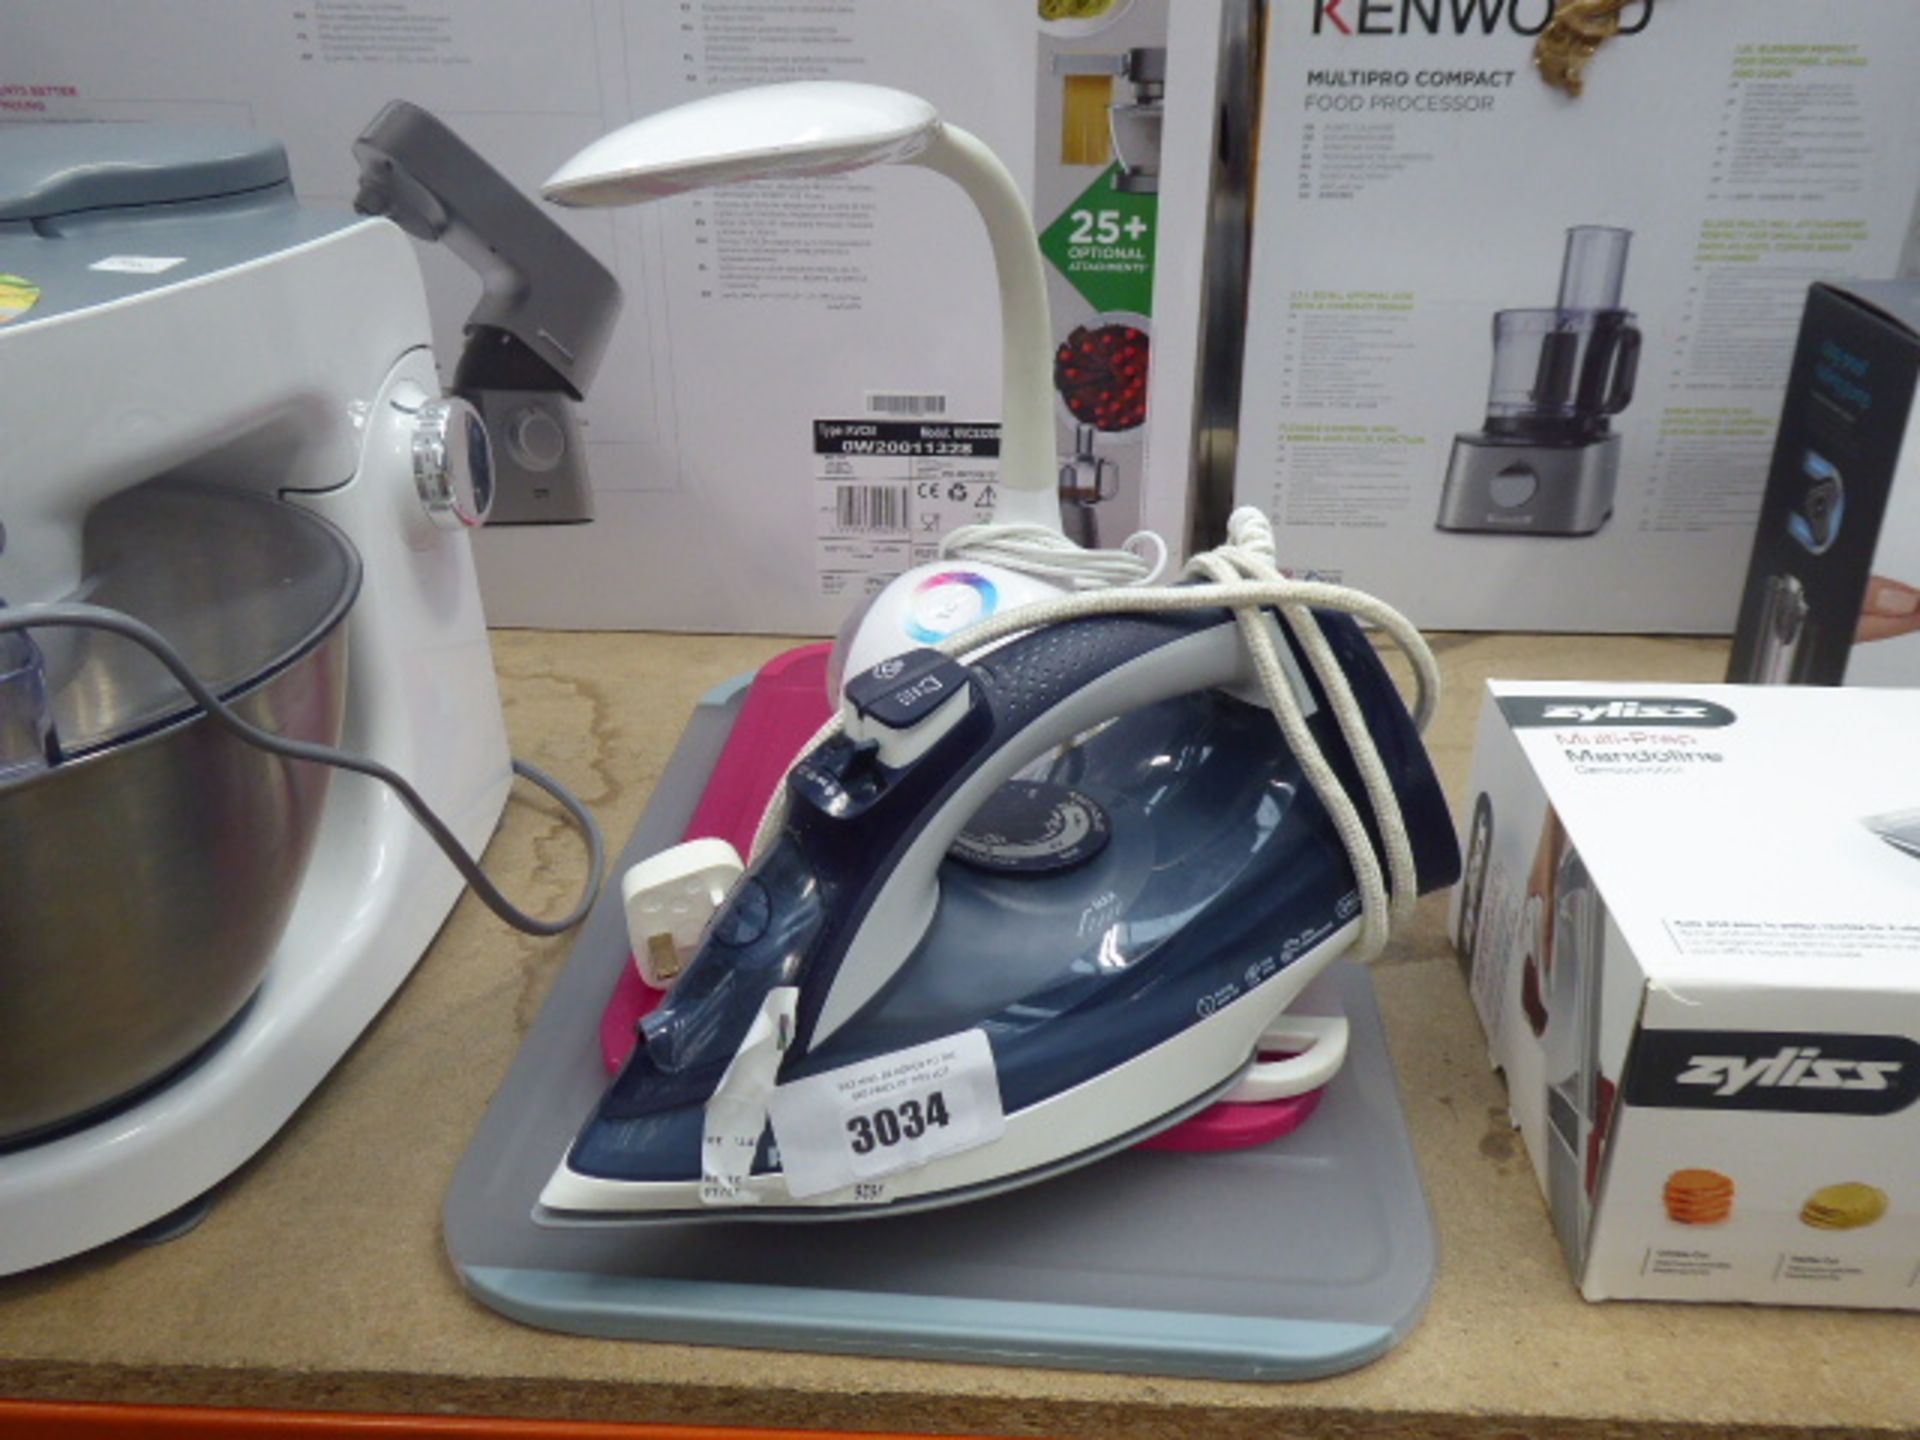 Steam iron, Ottlite desk lamp and 3 chopping boards